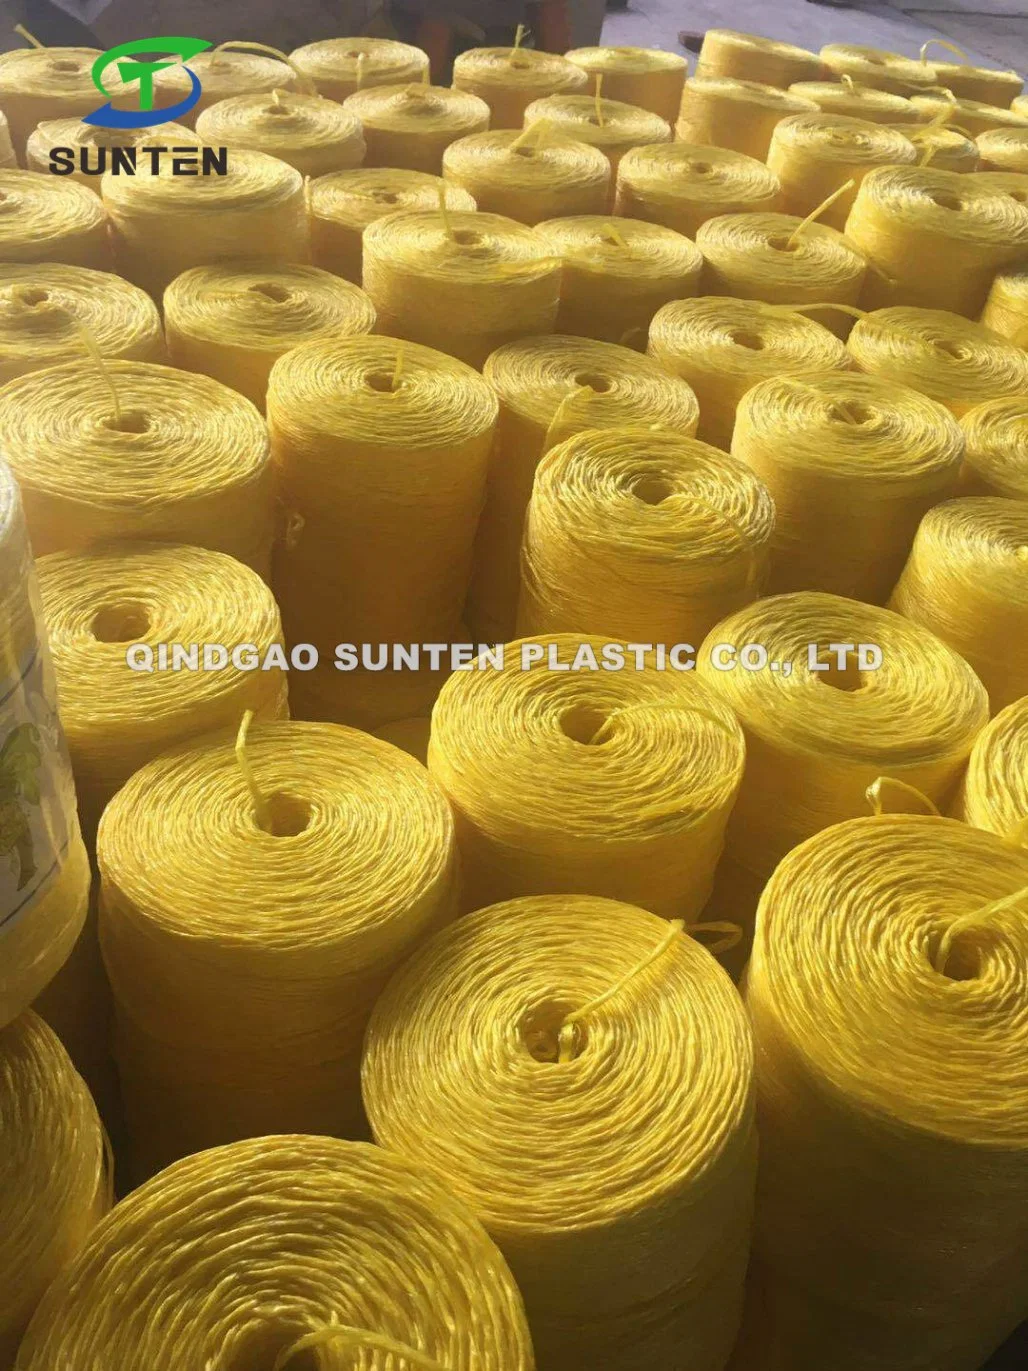 PP/Polypropylene Agriculture/Agricultural/Tomato/Banana Packing/Fibrillated/Split Film Hay Baler Twine for Binding Hay Straw in Green, Blue, etc